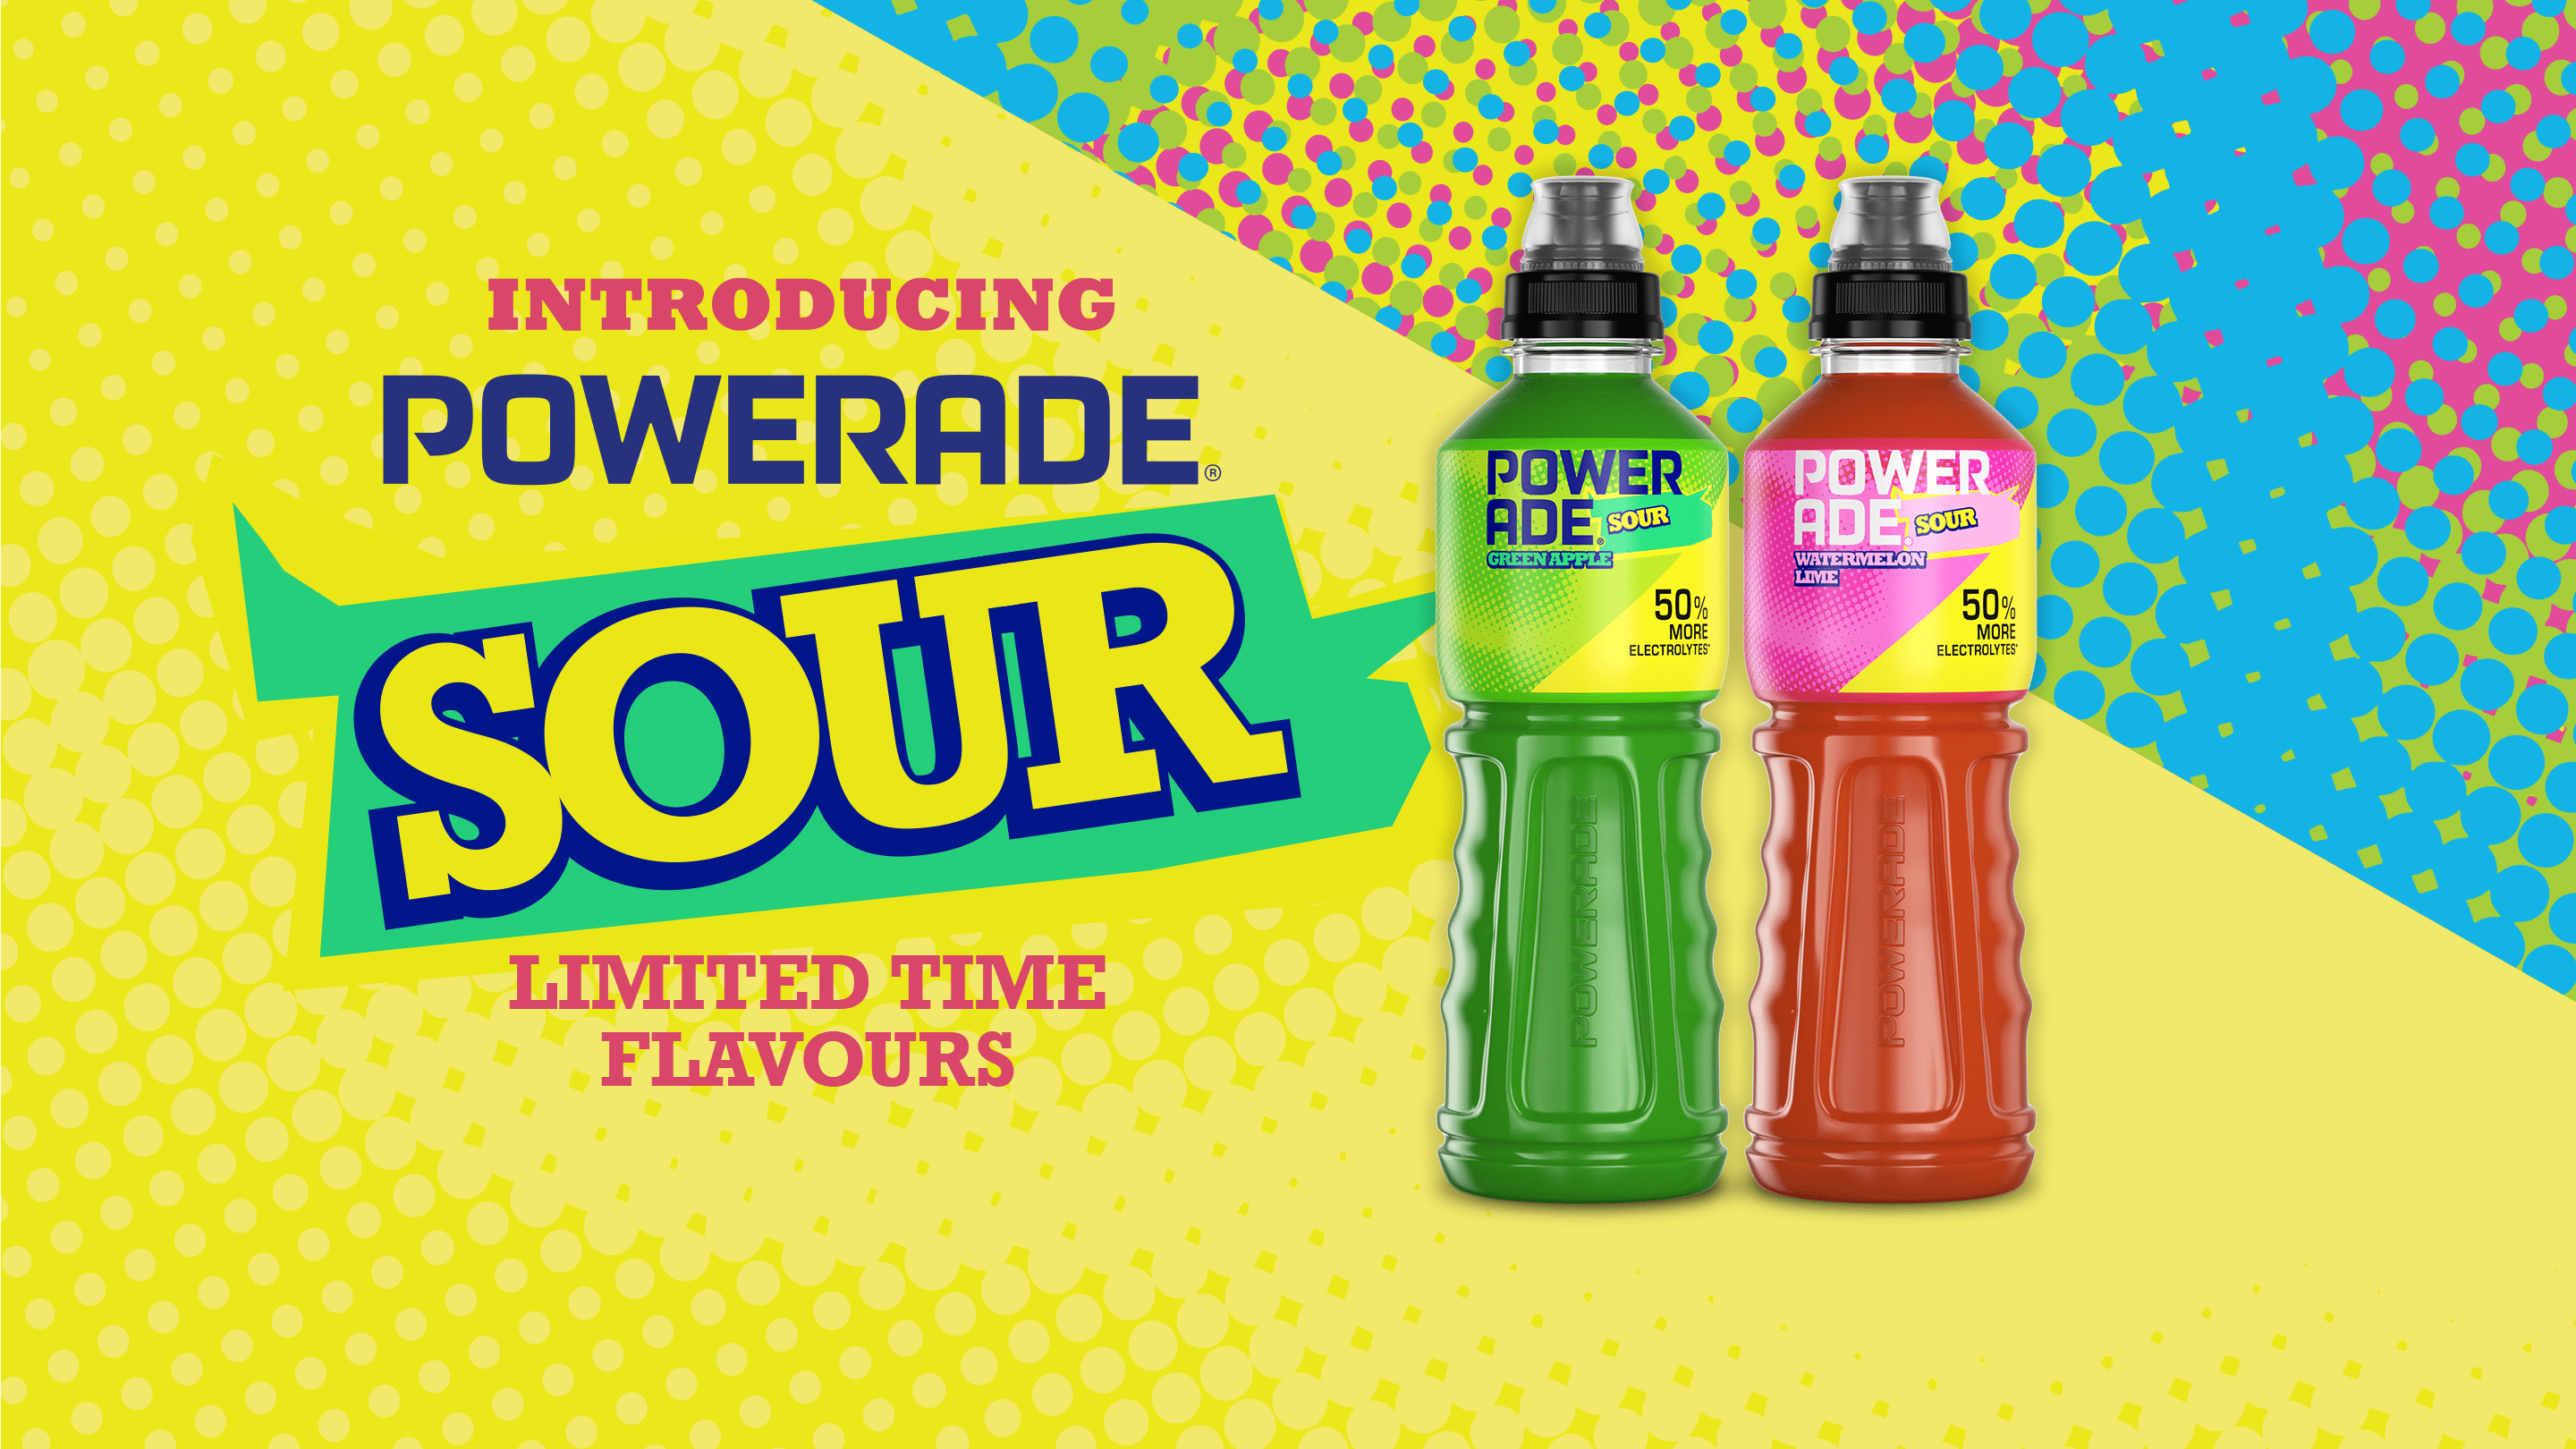 Introducing POWERADE SOUR. Limited Time Flavours.